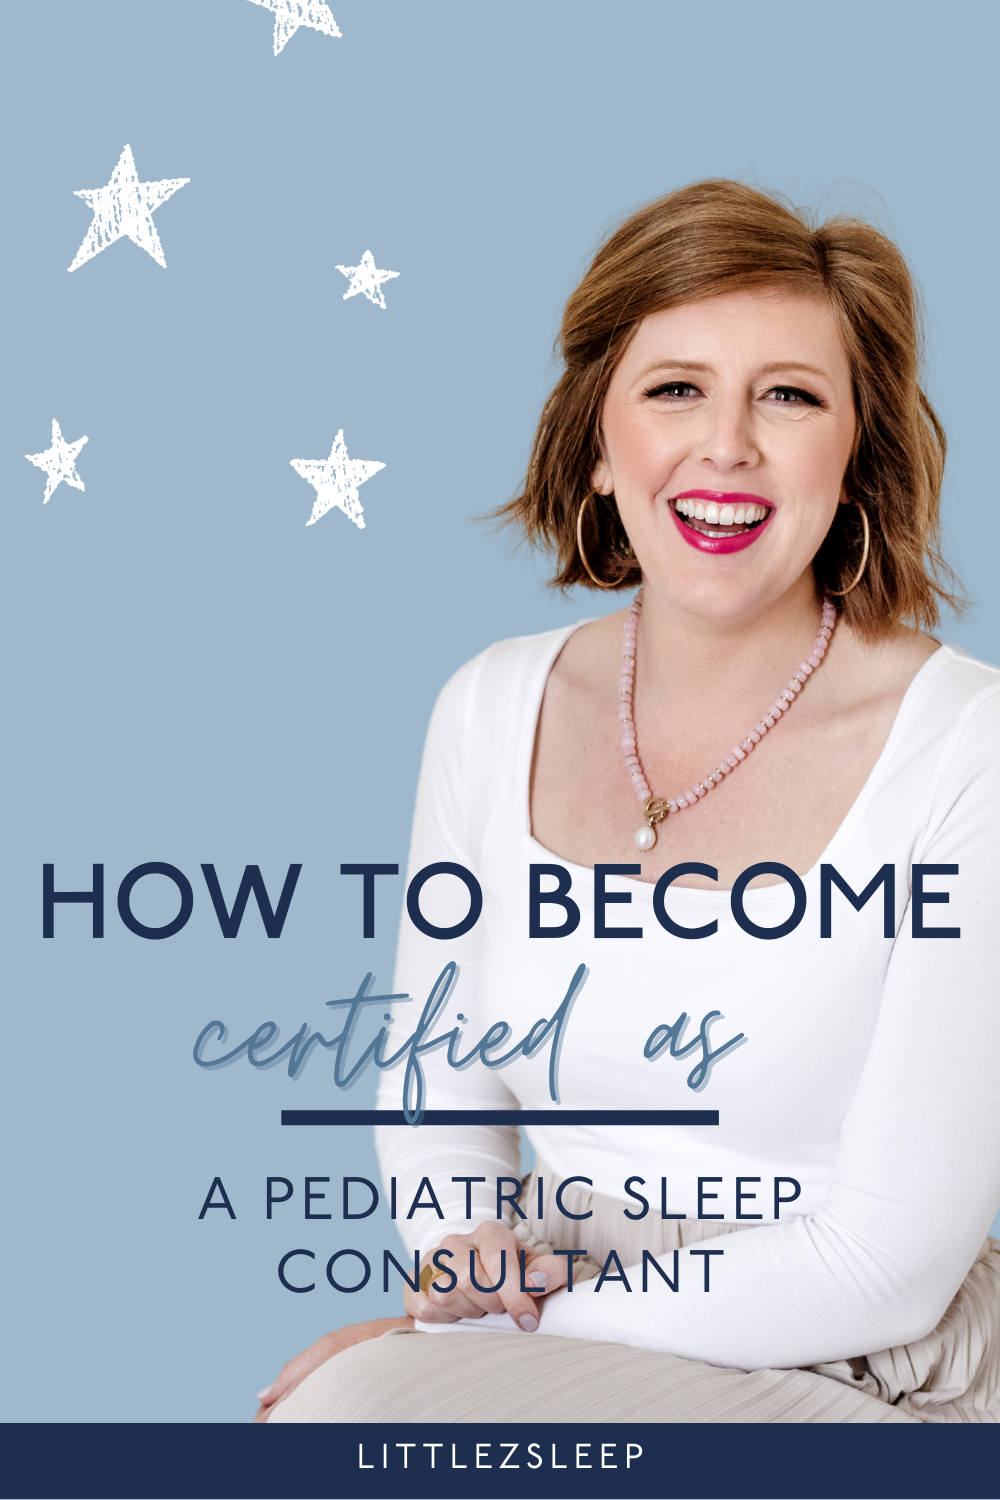 How to Become a Pediatric Sleep Consultant